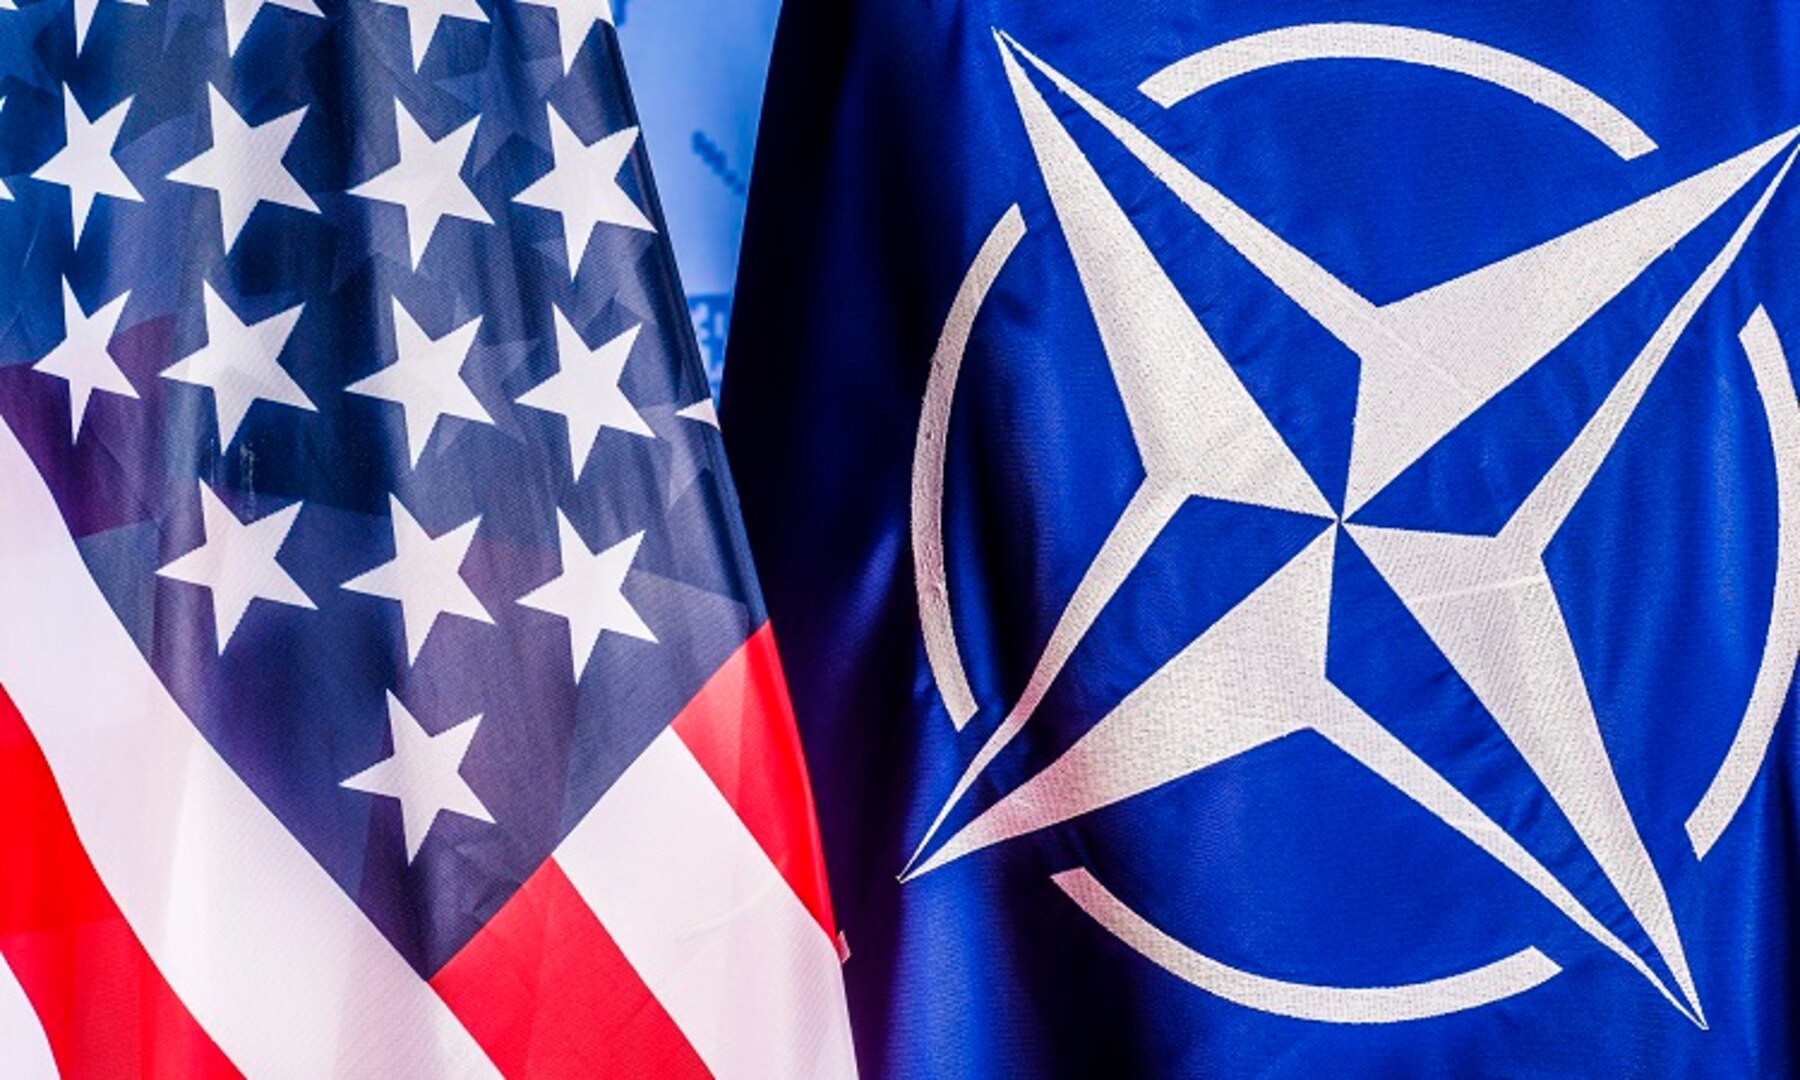 US/NATO Flags